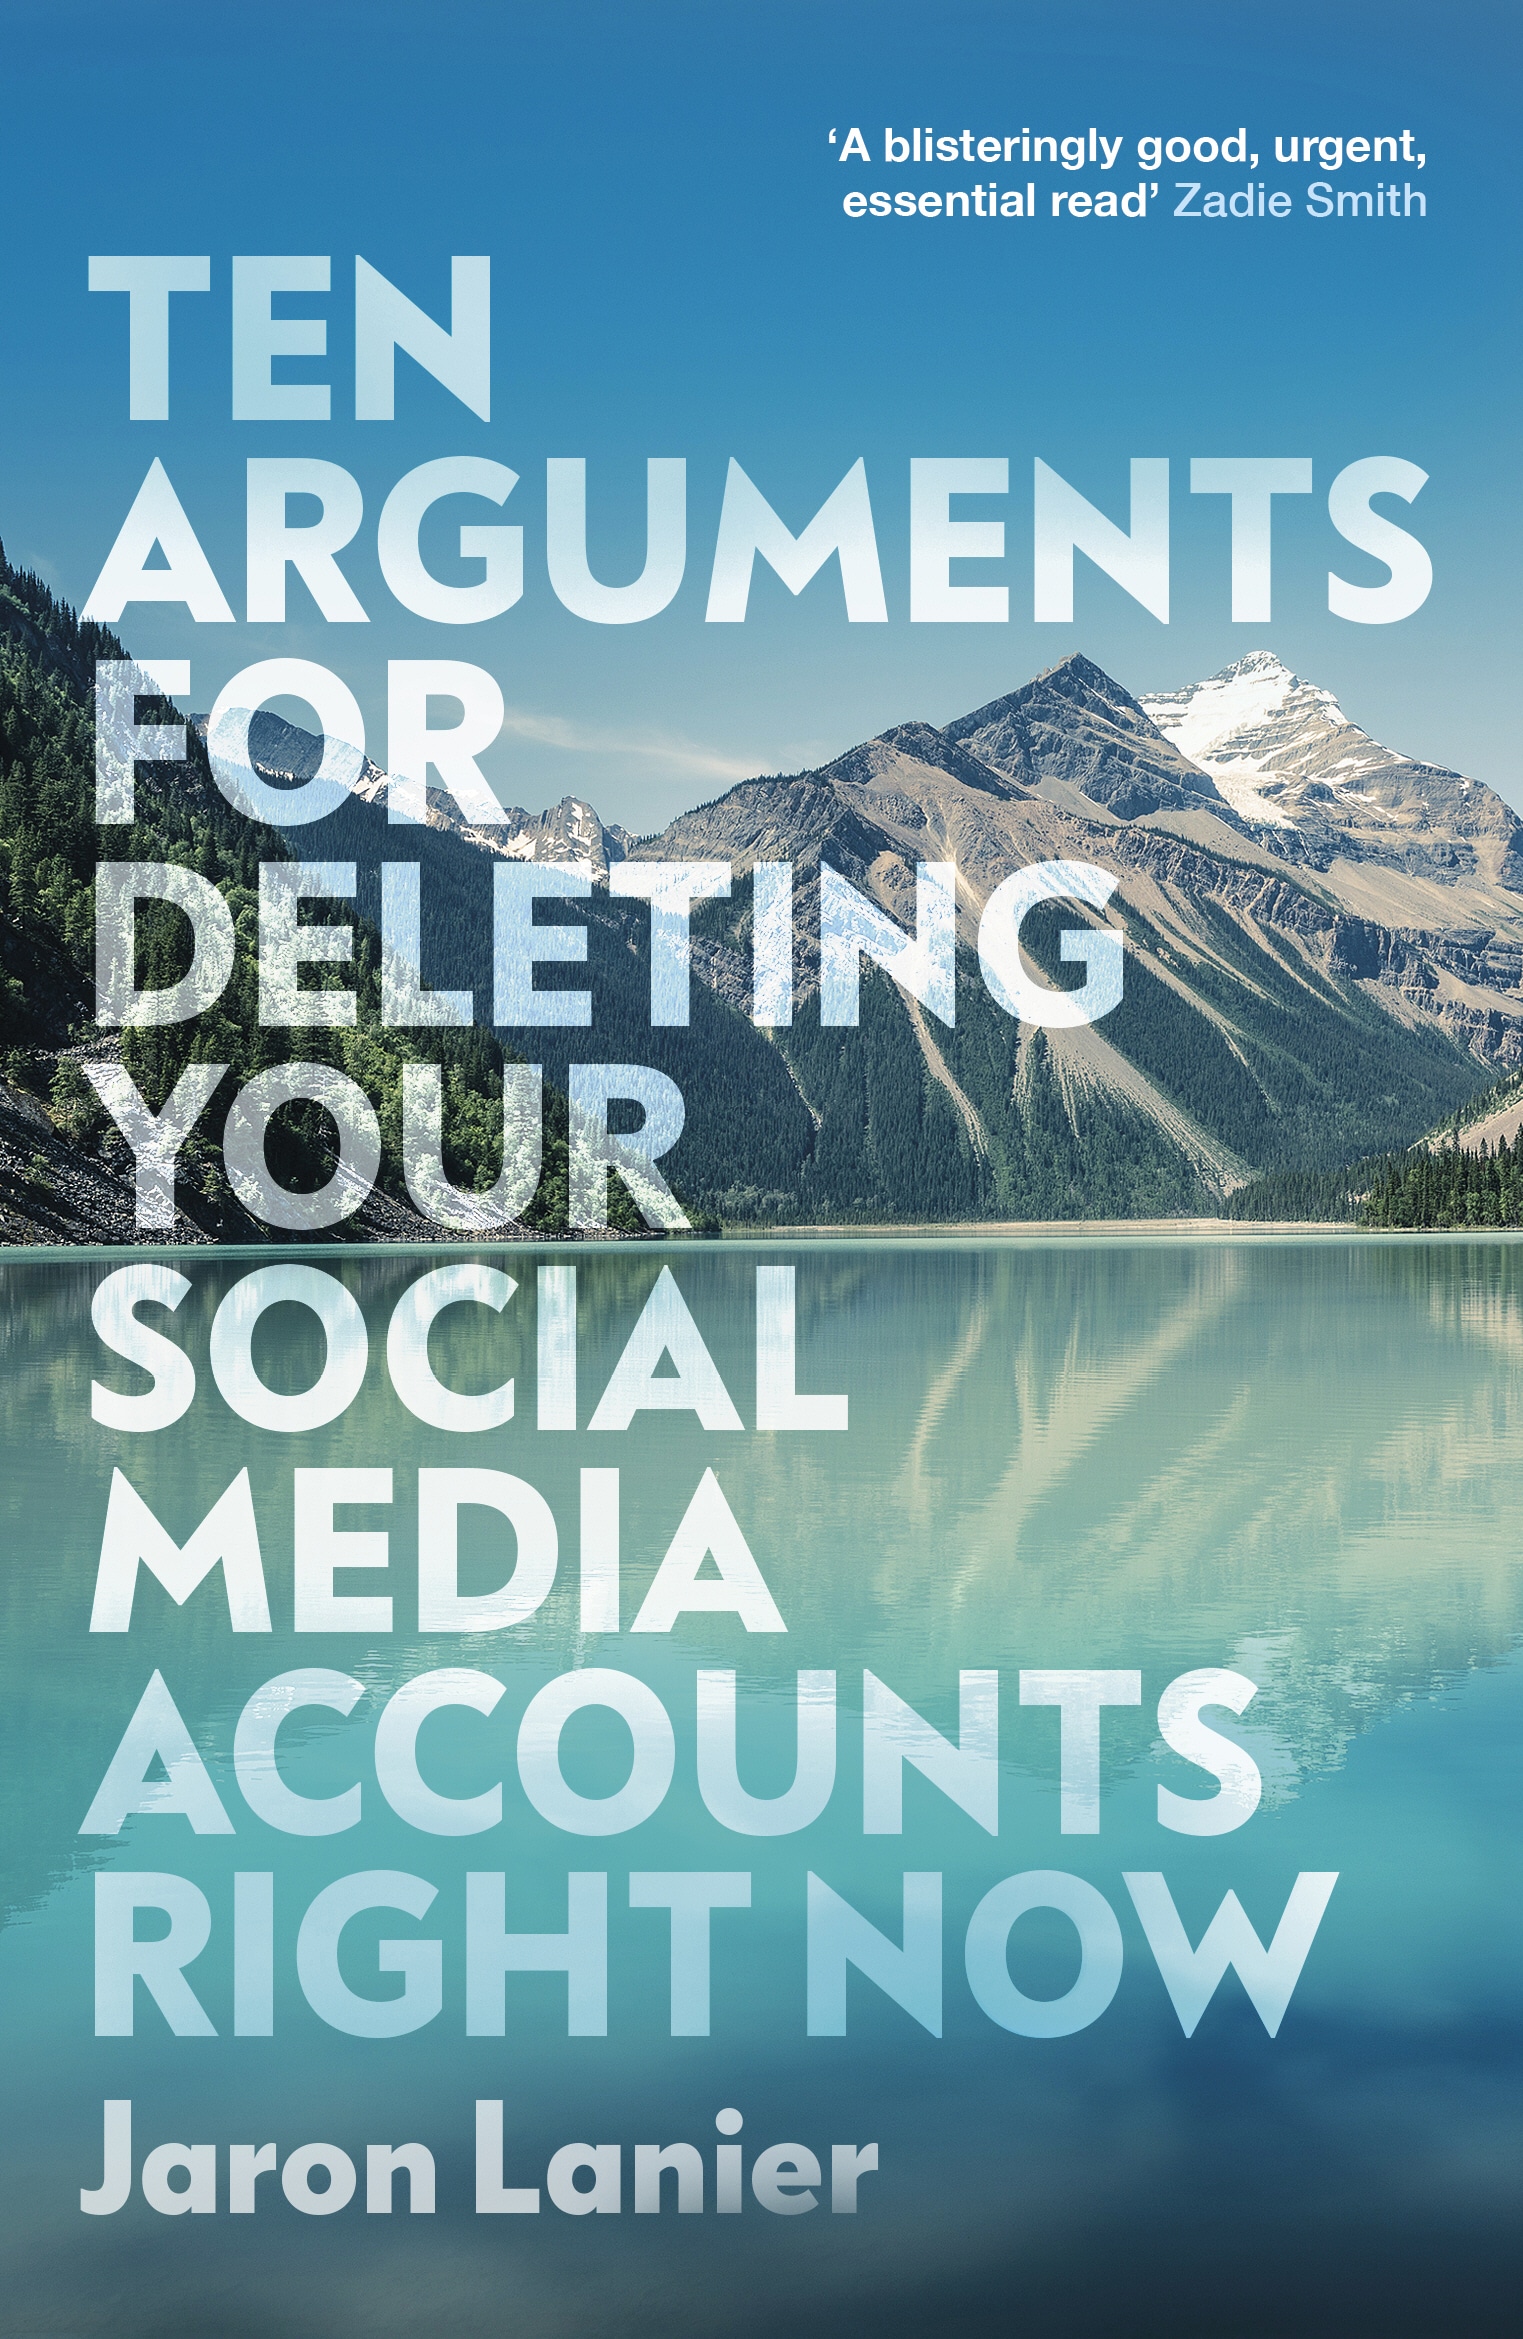 Book “Ten Arguments For Deleting Your Social Media Accounts Right Now” by Jaron Lanier